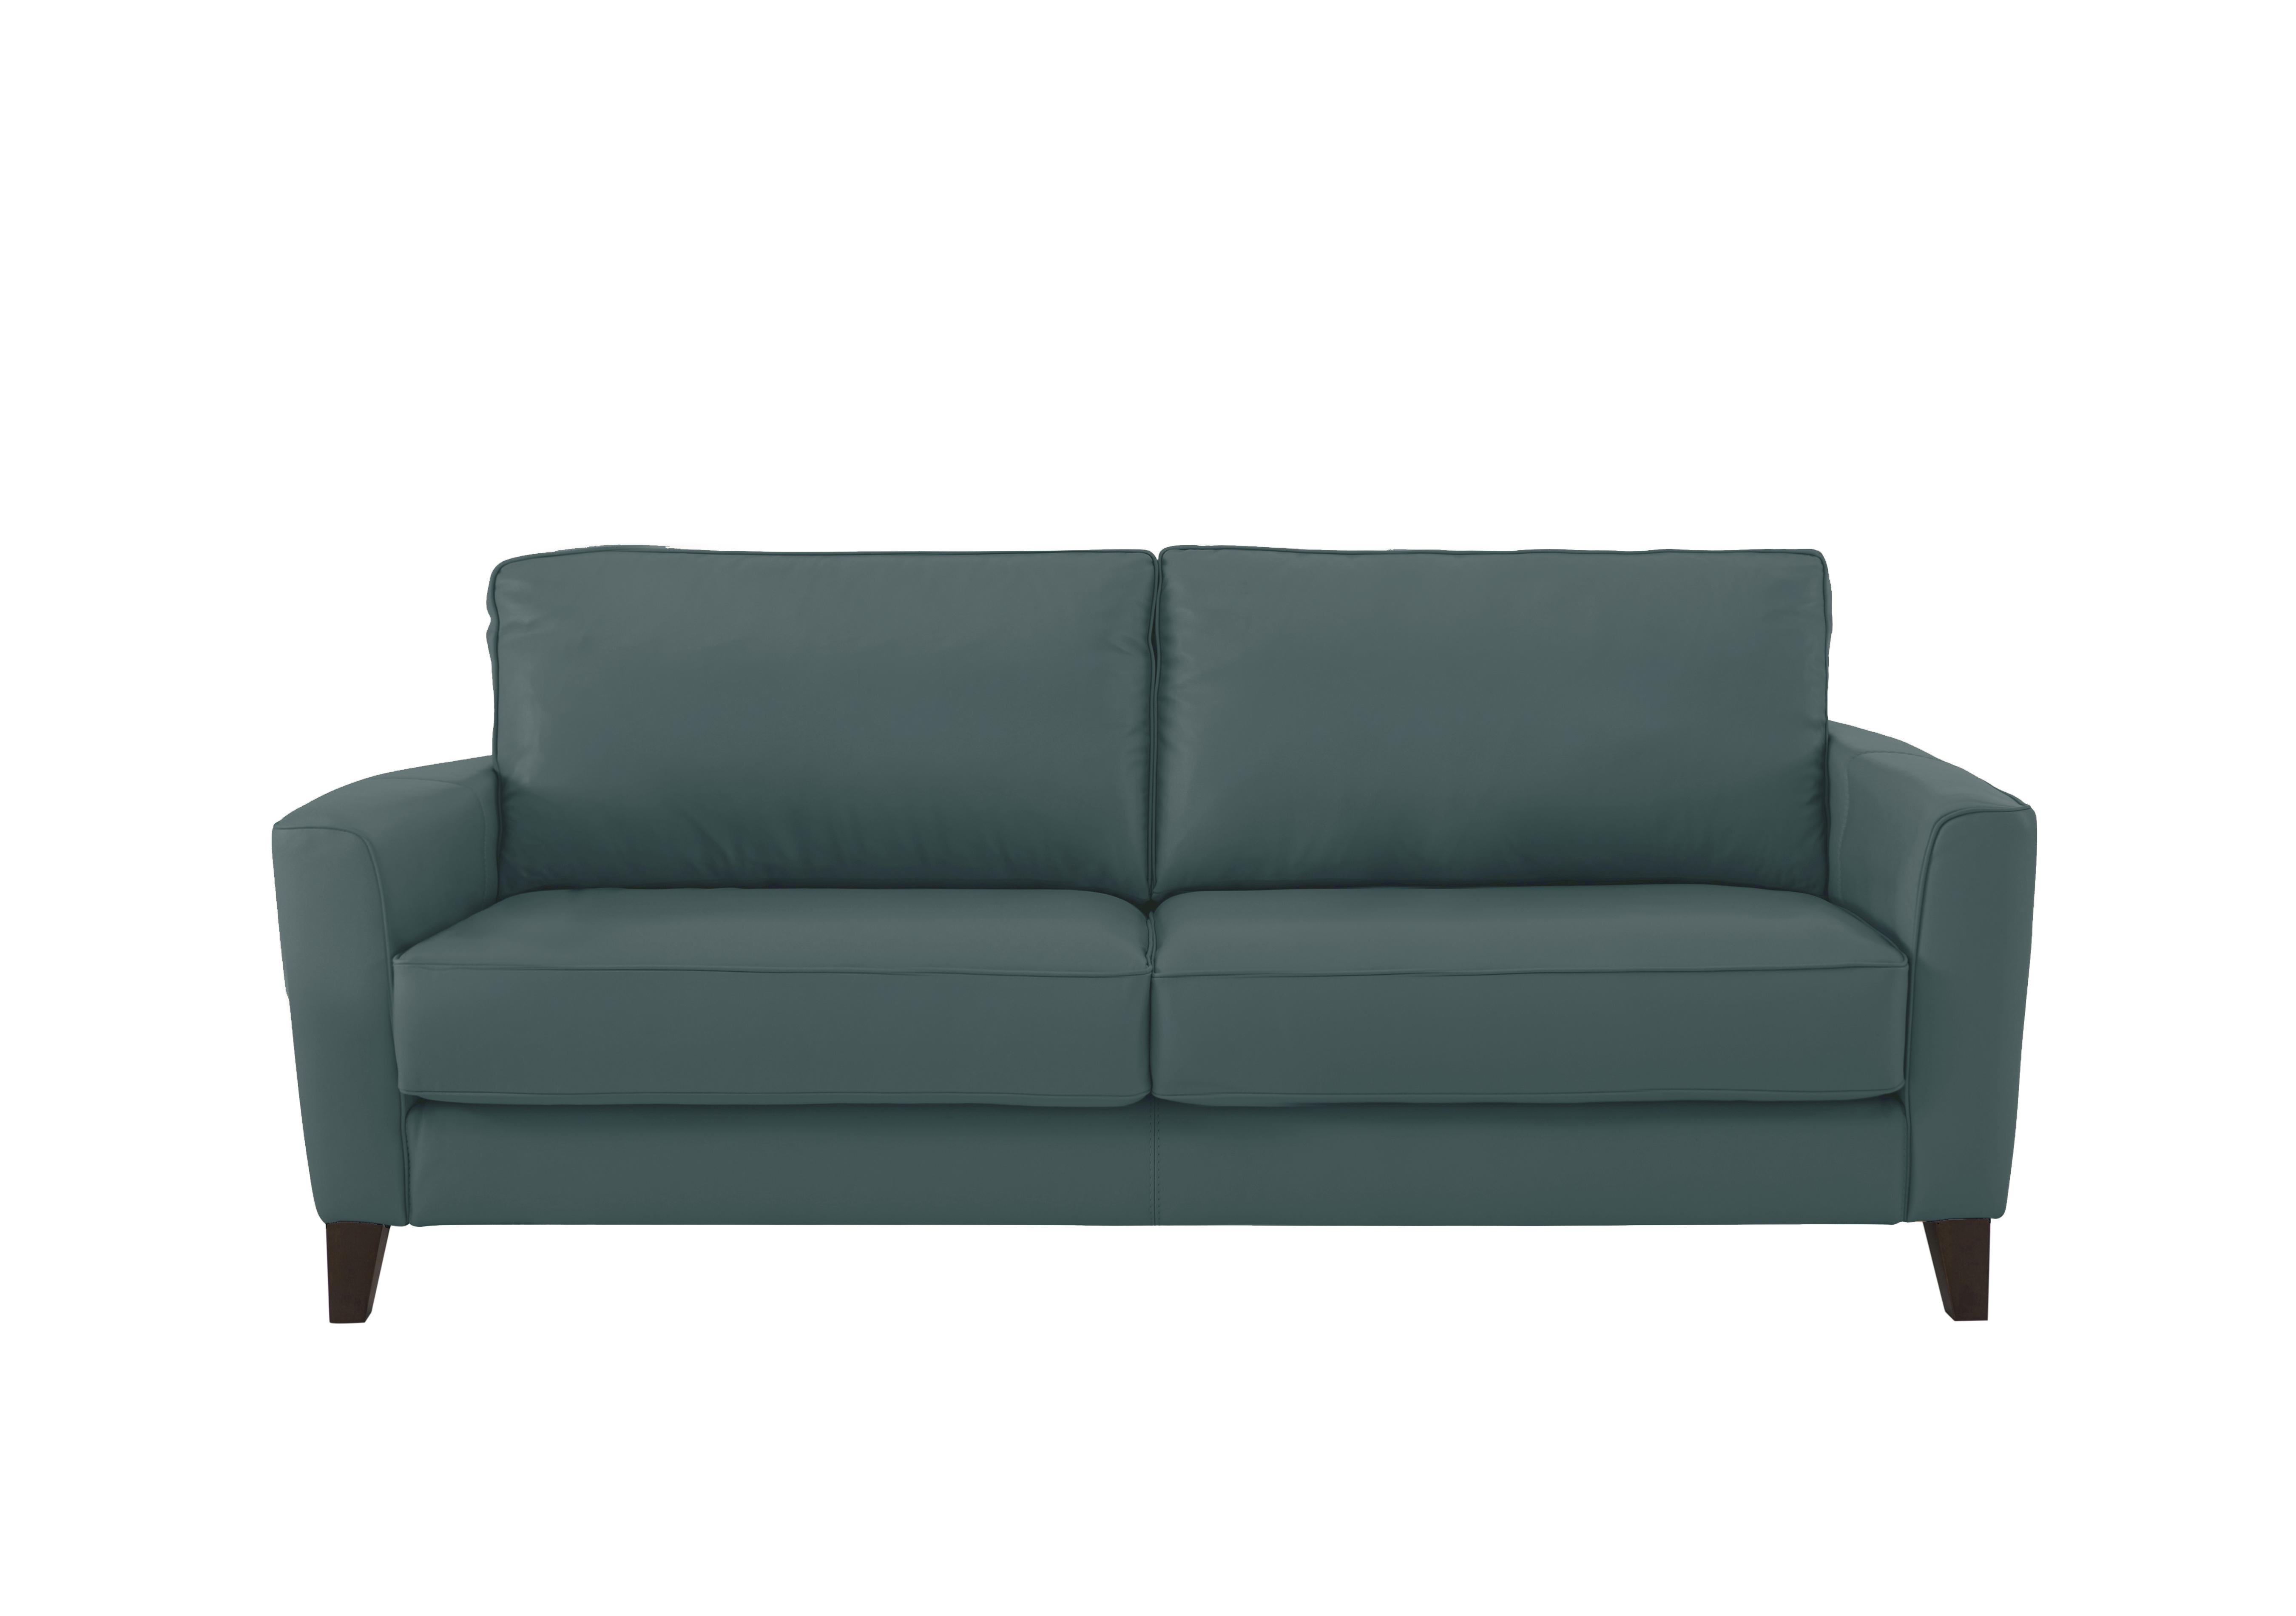 Brondby 3 Seater Leather Sofa in Bv-301e Lake Green on Furniture Village